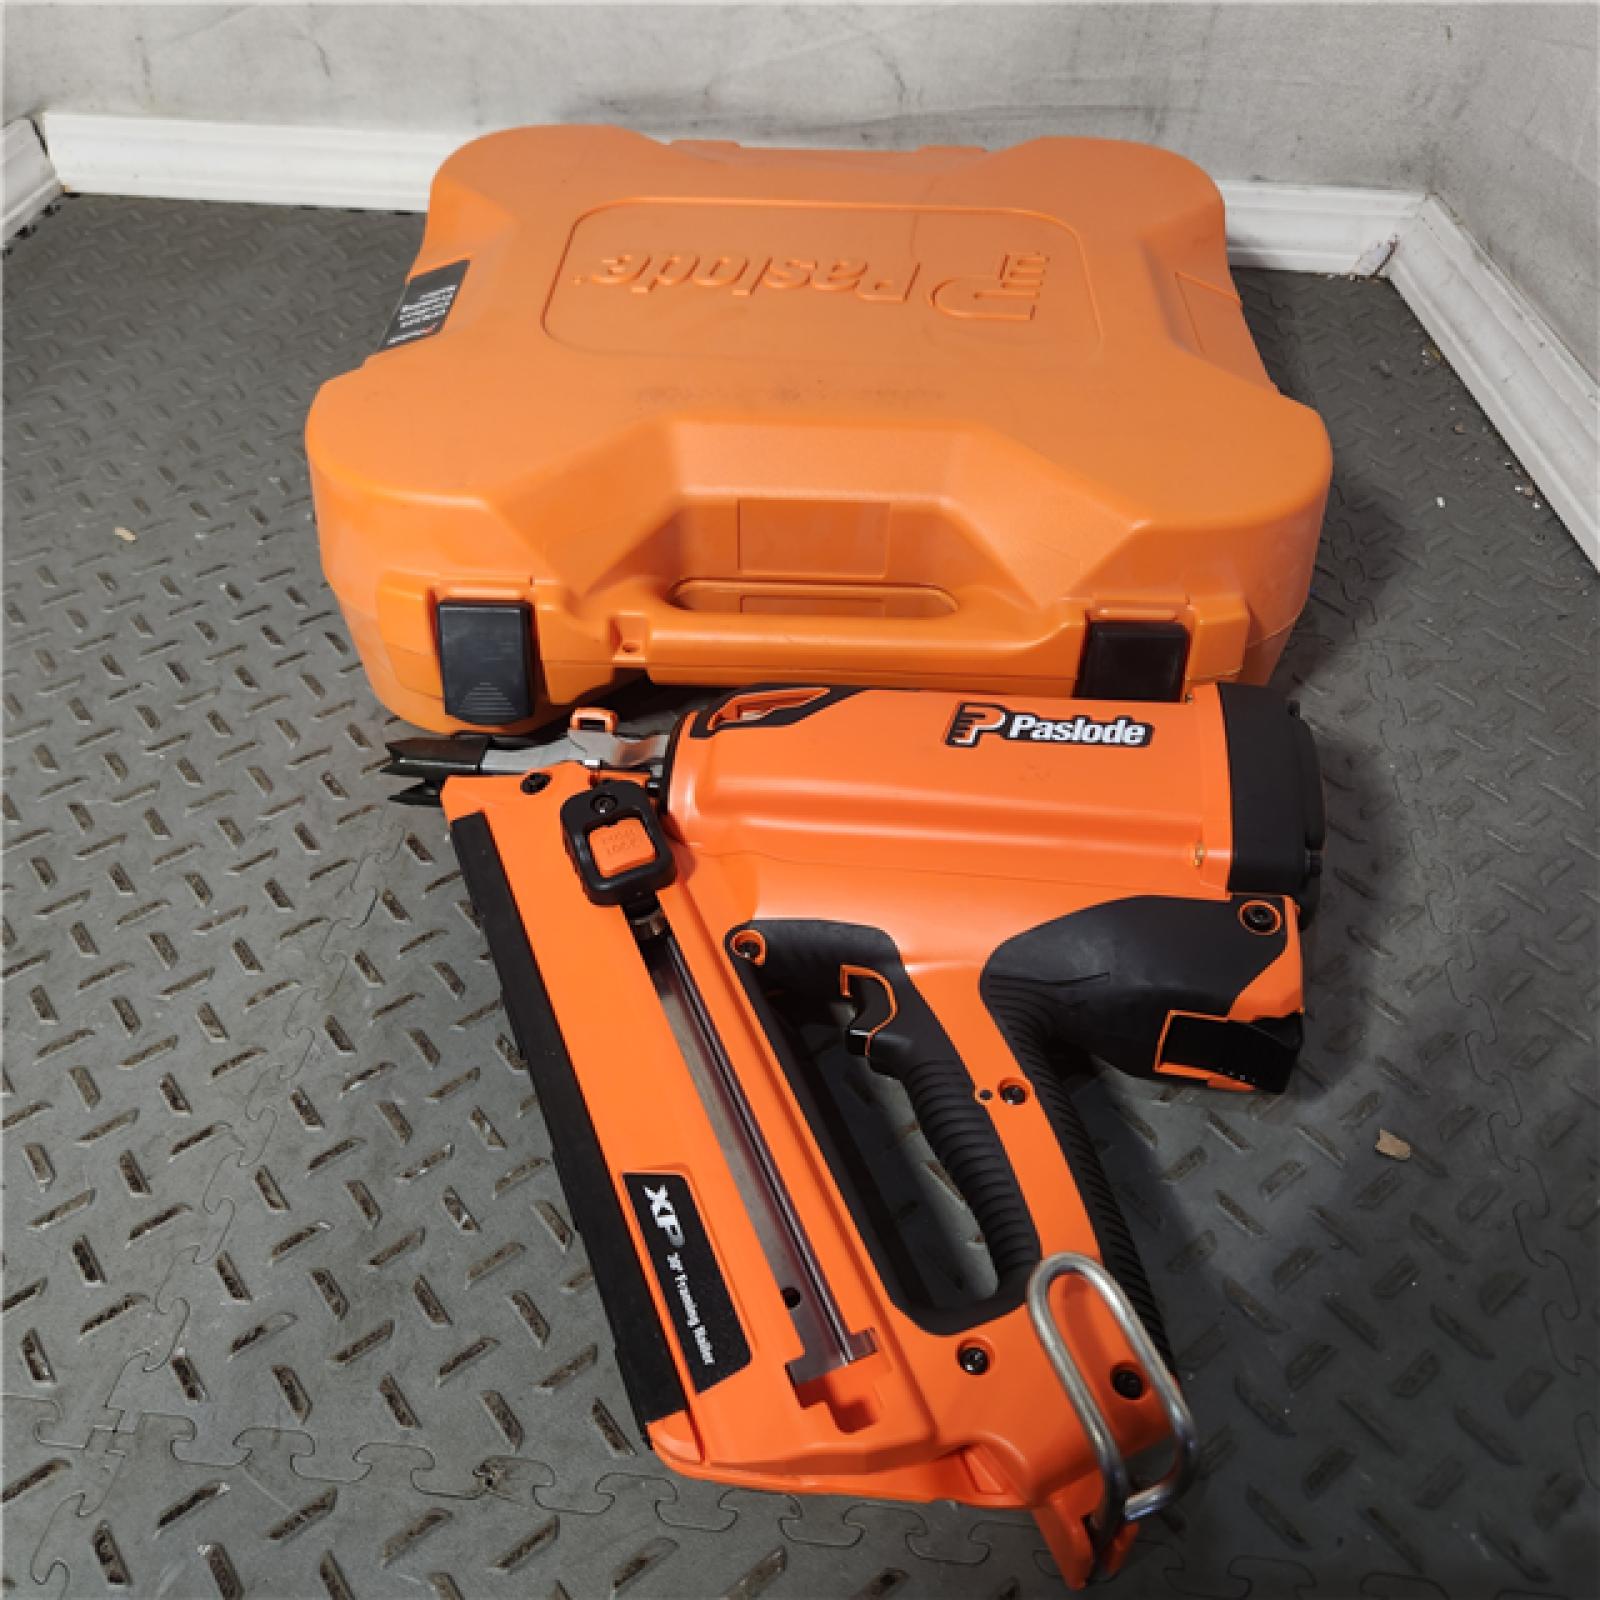 HOUSTON Location-AS-IS-Paslode CFN325XP Lithium-Ion Battery 30-Degree Cordless Framing Nailer Combo Kit Includes Brite FNP APPEARS IN NEW Condition